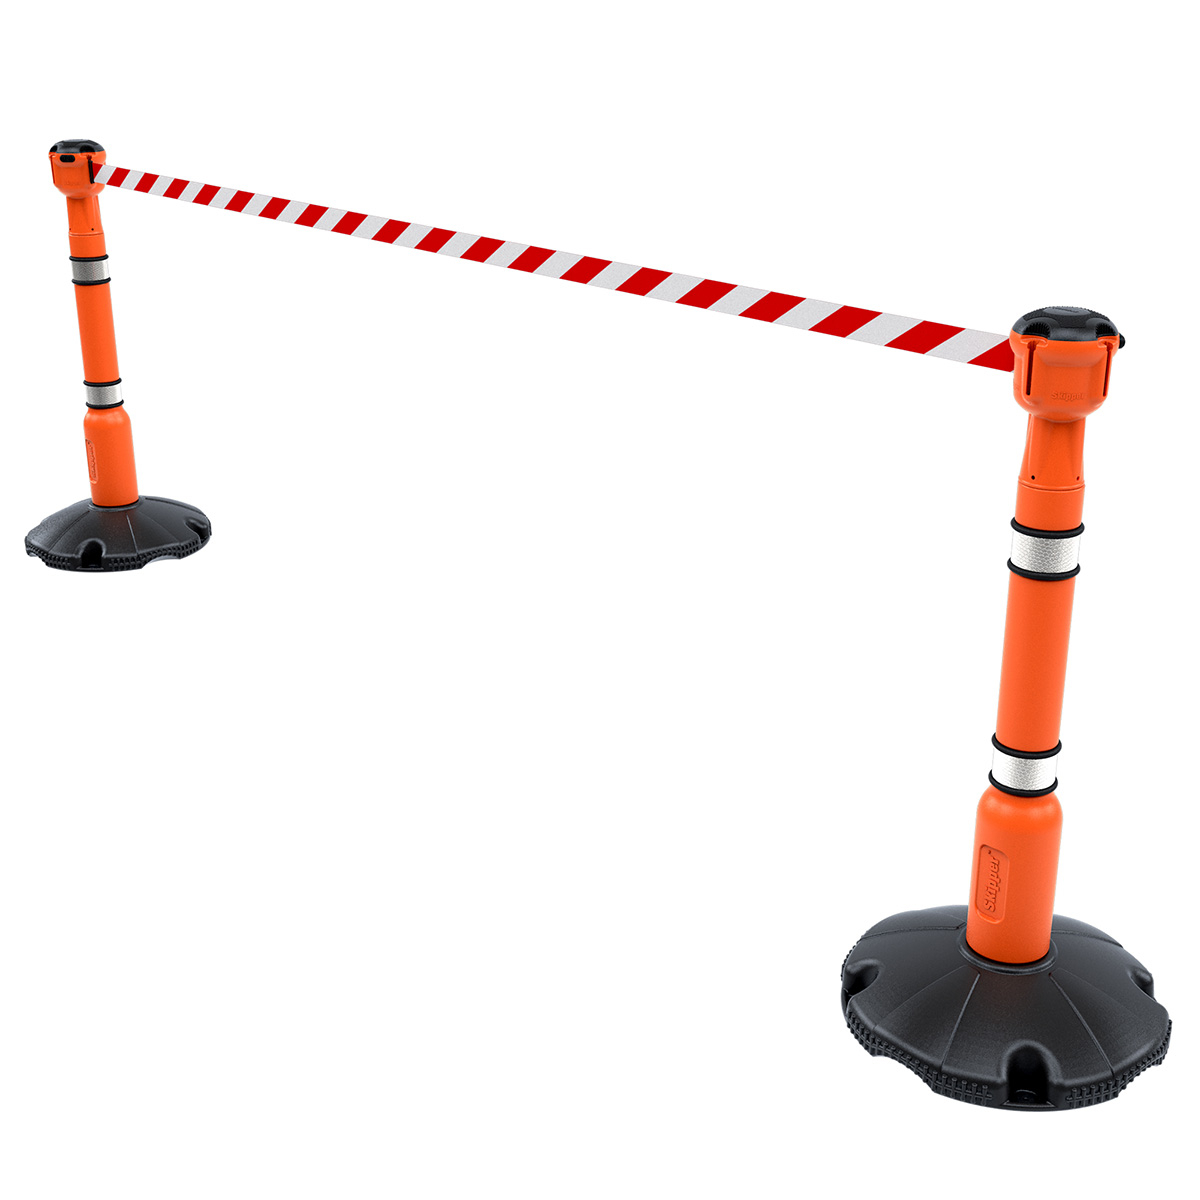 Skipper™ Retractable Barrier Kit 9m Offers a High-Visibility Instant Safety Barrier